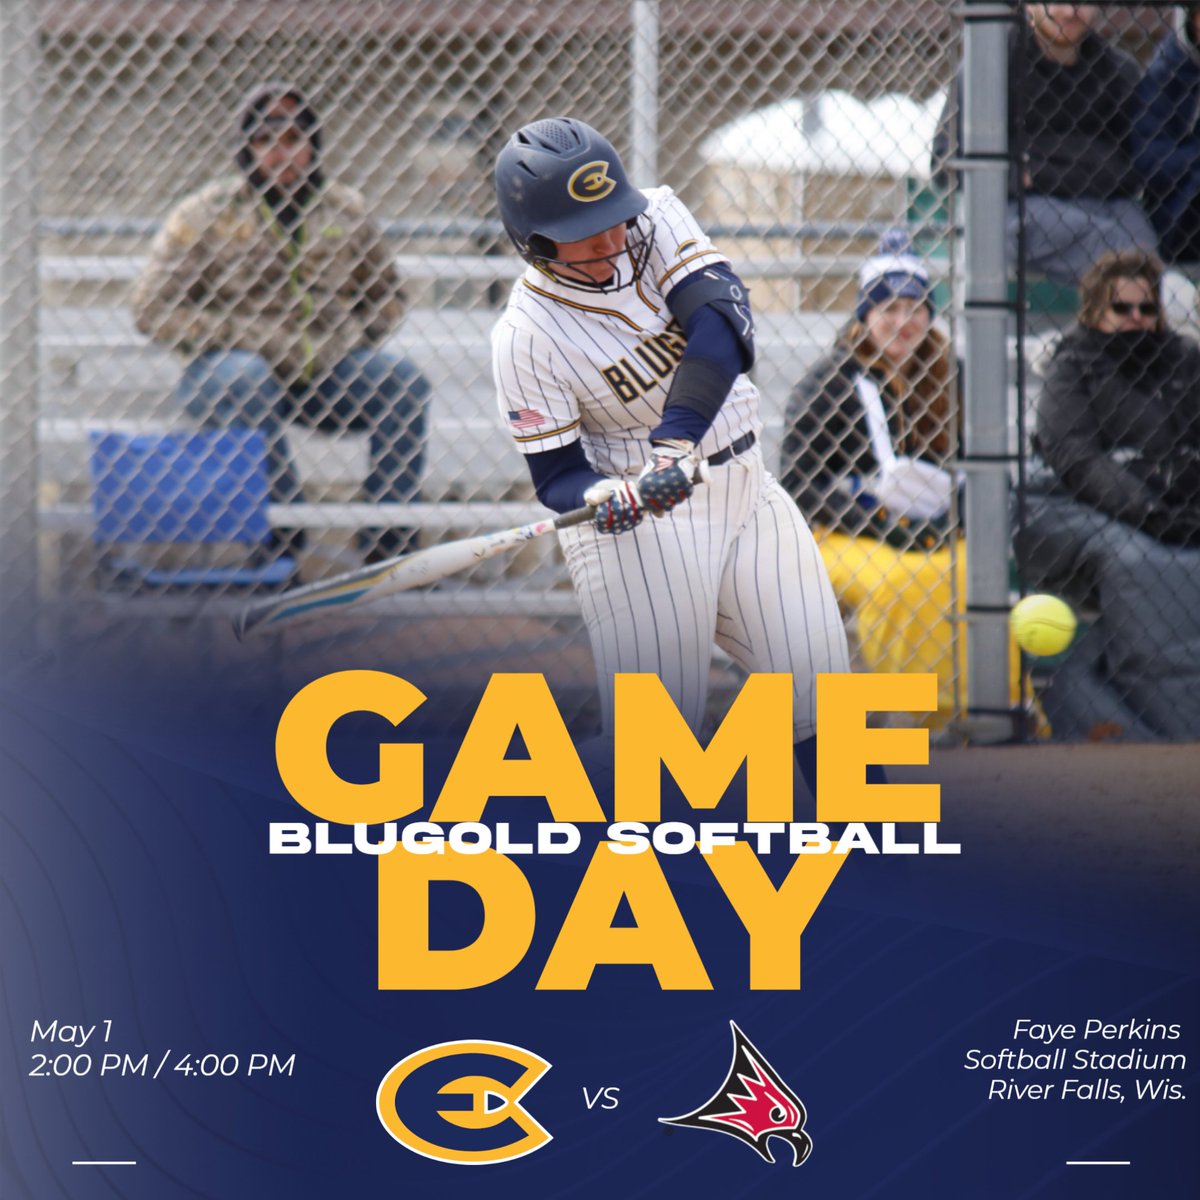 ⚔️BATTLE OF THE BIRDS🦅 We take our final road trip of the regular season to River Falls this afternoon! Catch all the action at blugolds.com! #BeHeroic #RollGolds